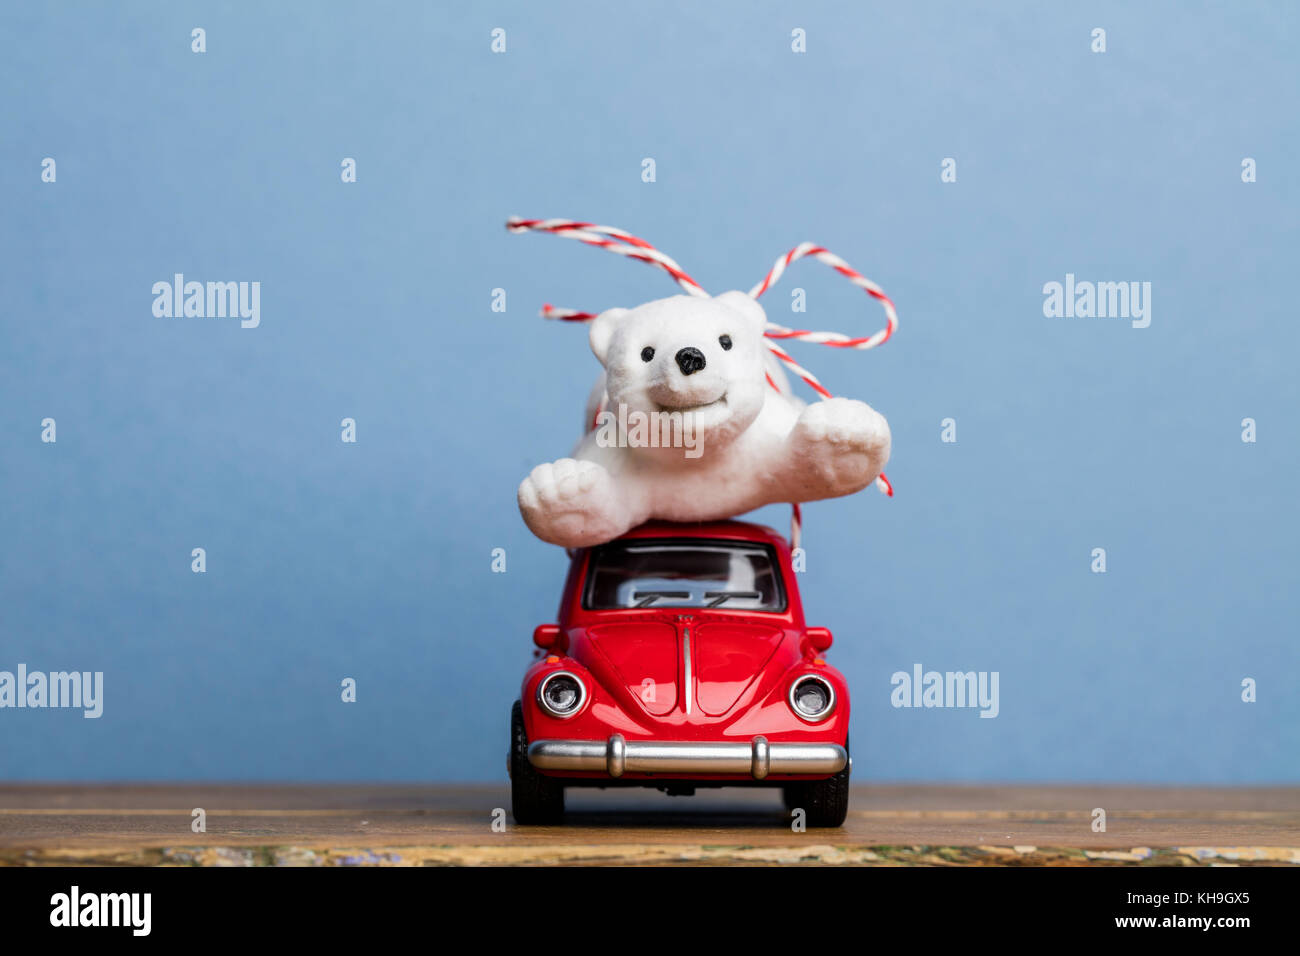 LONDON, UK - DECEMBER 15th 2016: Christmas background concept with red toy car aginst blue background Stock Photo